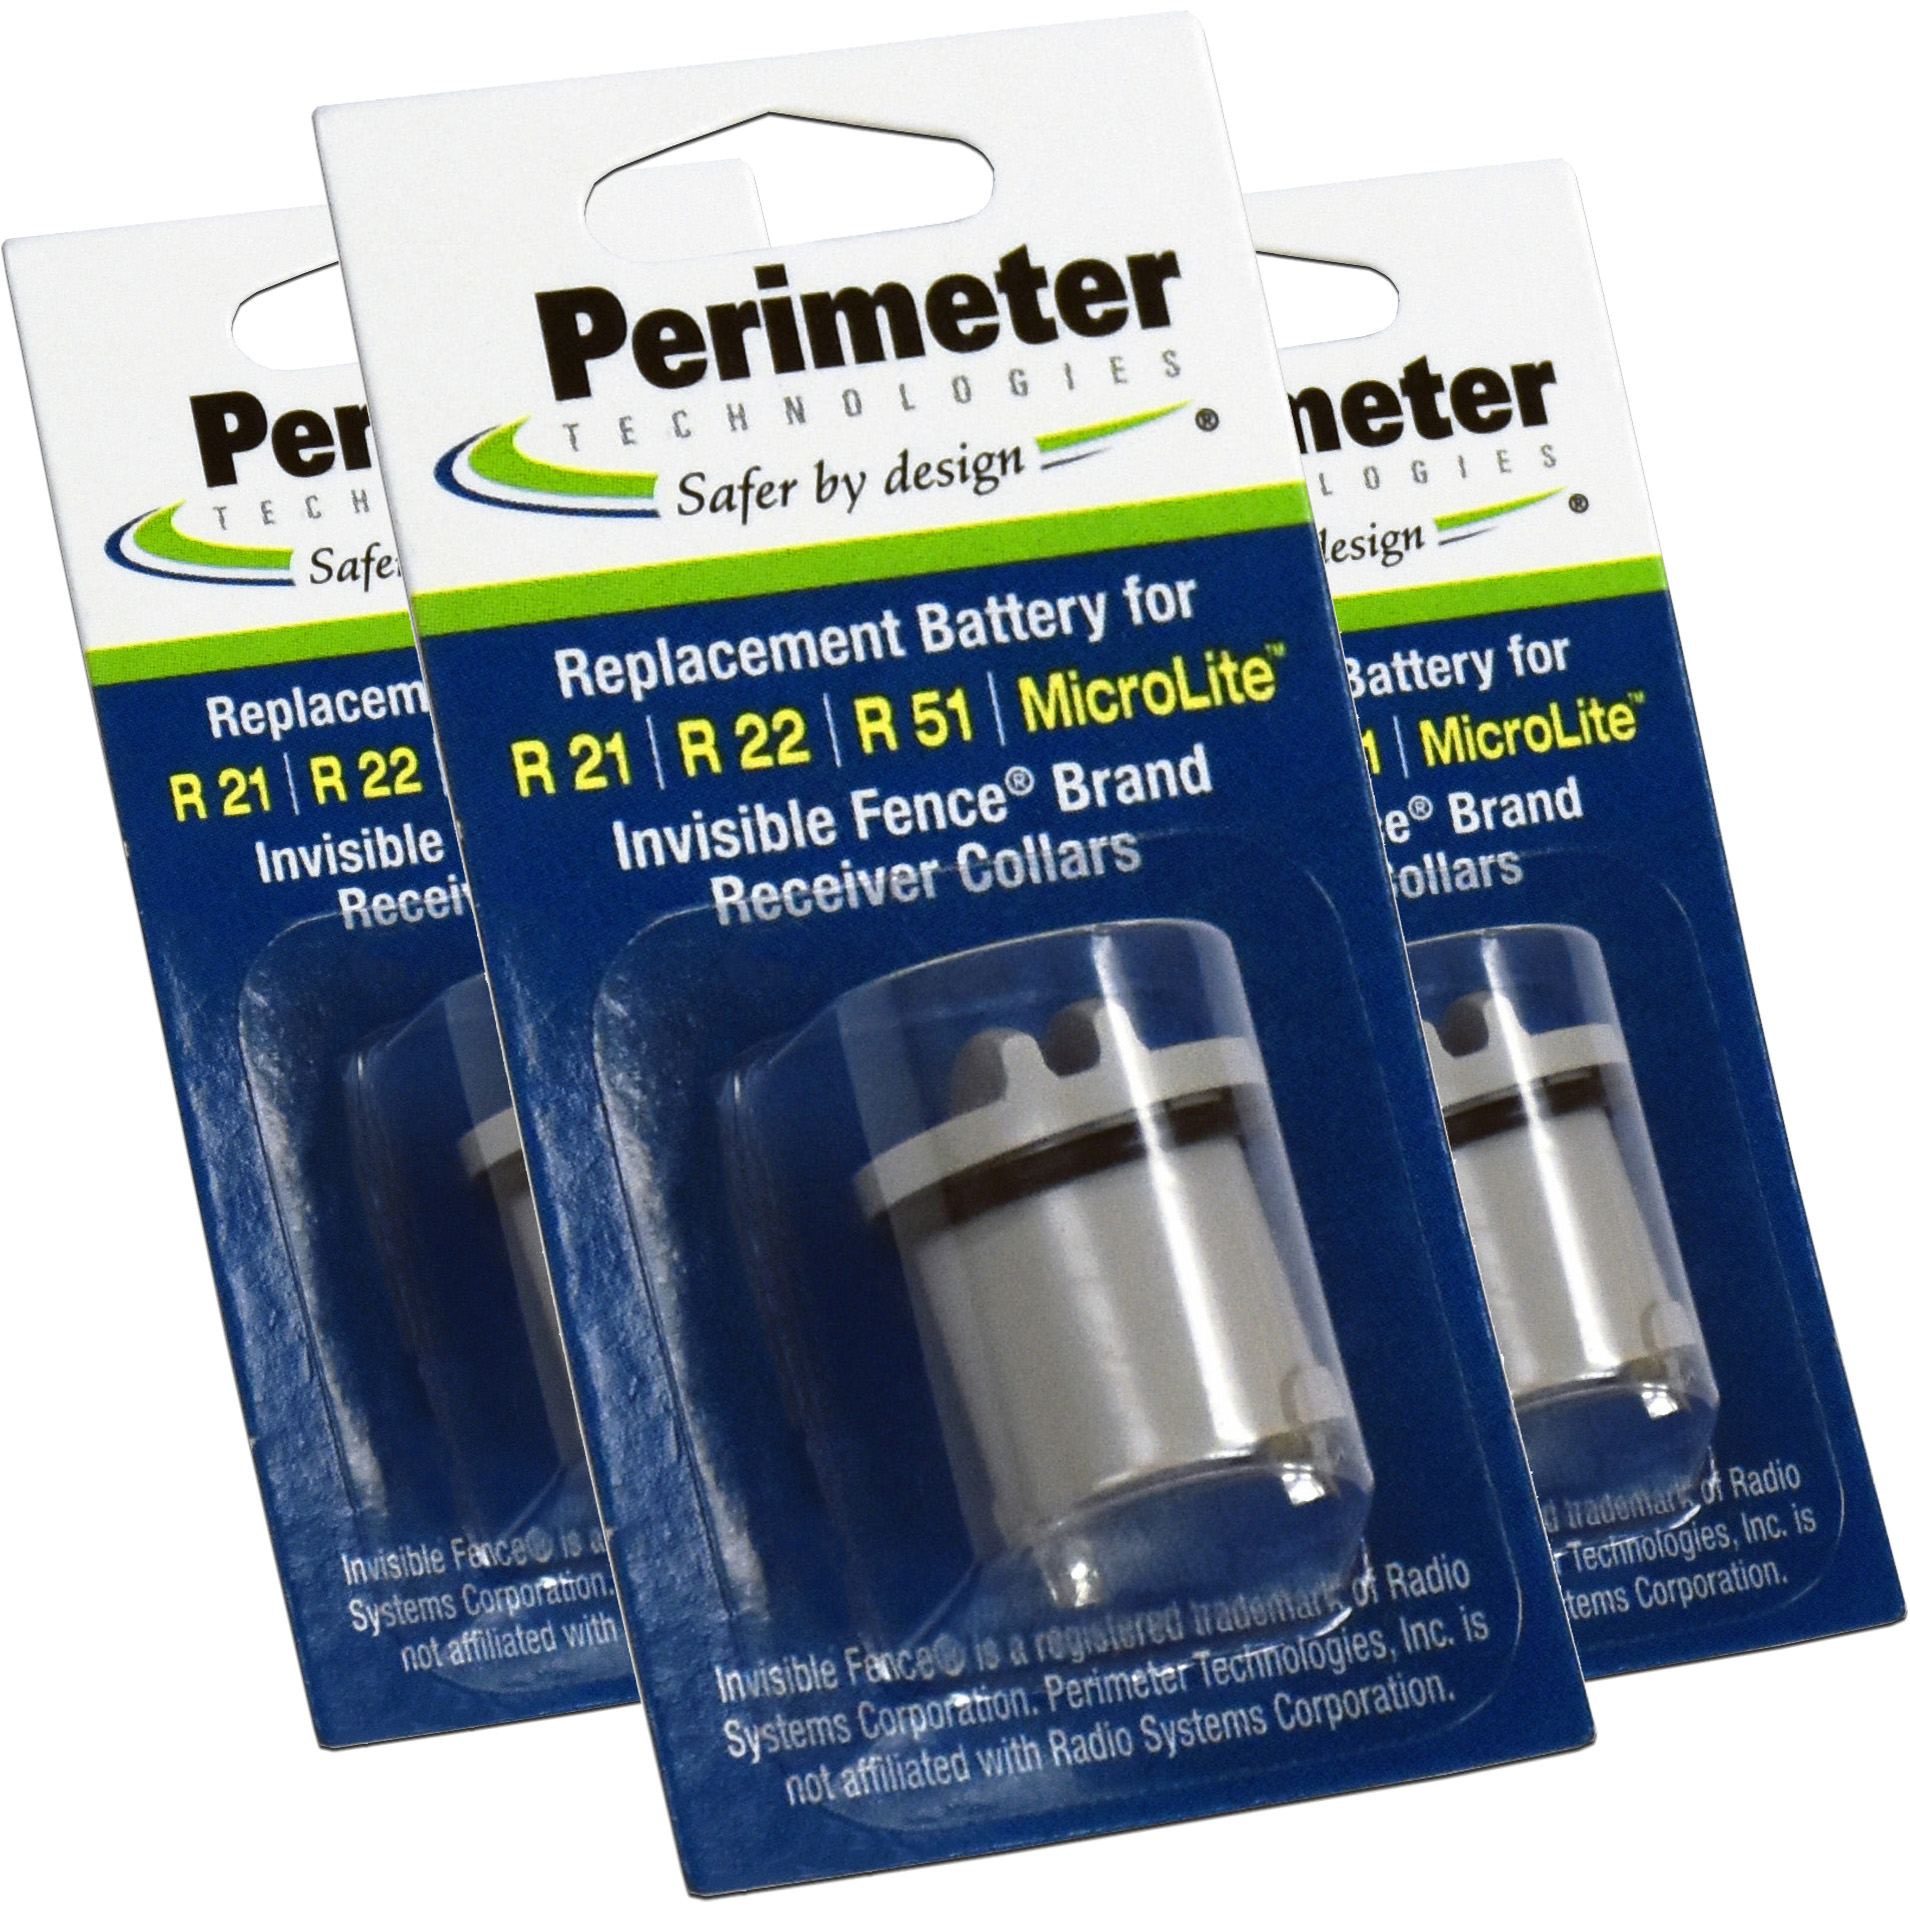  Perimeter Technologies Dog Collar Batteries Compatible with Invisible  Fence, Replacement Batteries for R21 or R51 Receiver Dog Collars, Includes ElectroPet Training Clicker